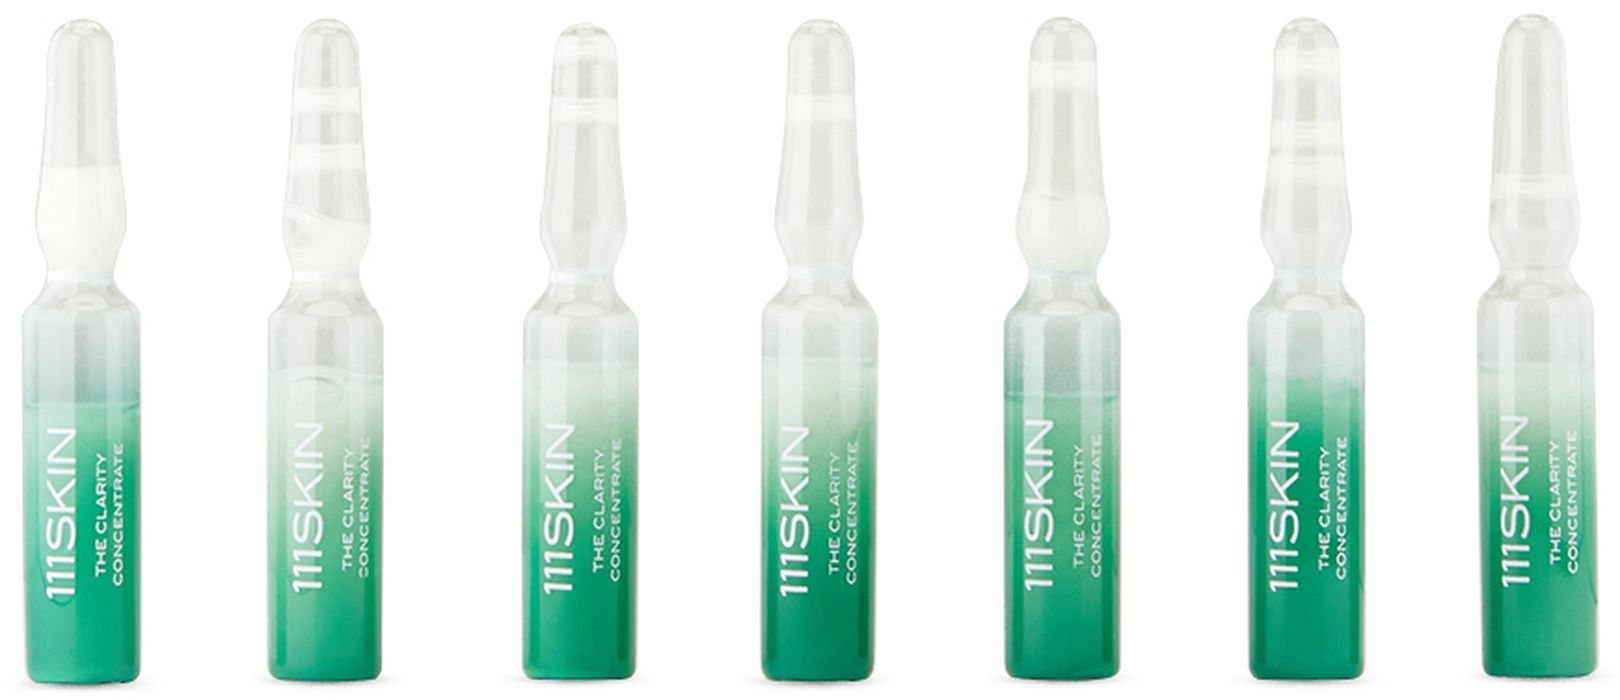 111 Skin Seven-Pack 'The Clarity Concentrate' Set, 2 mL